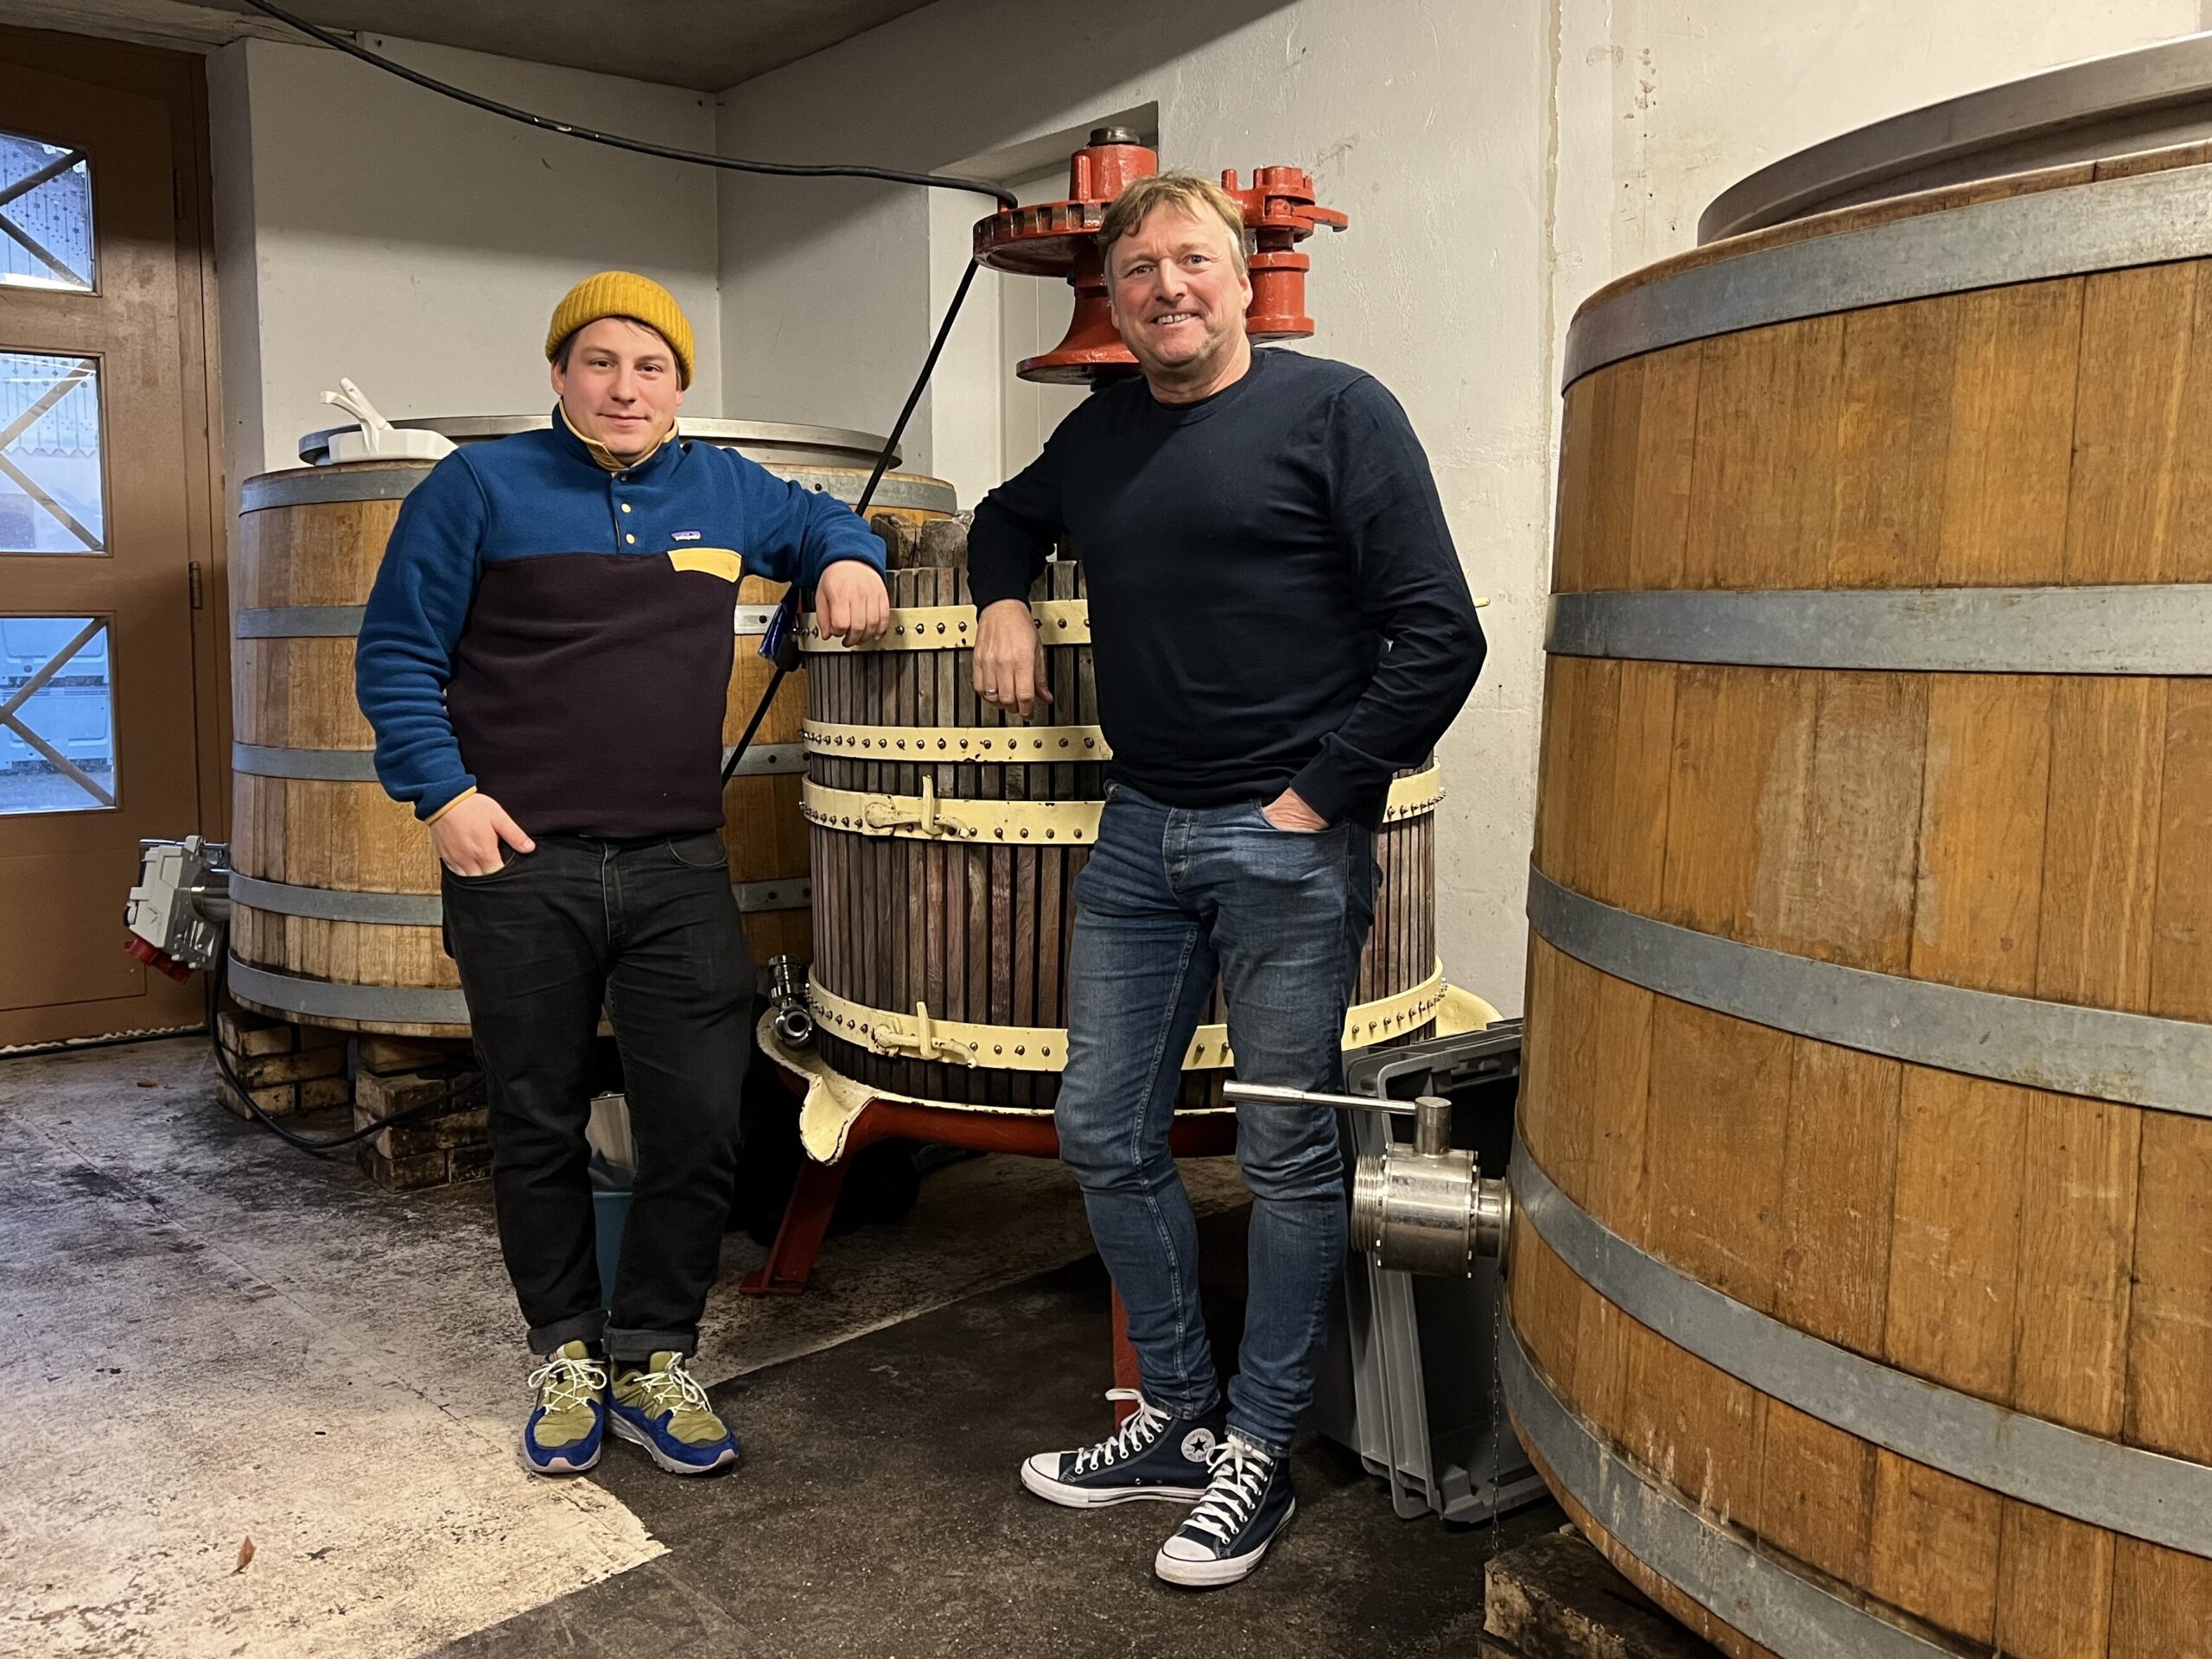 Silas Weiss and Hanspeter Zieresien in the cellar